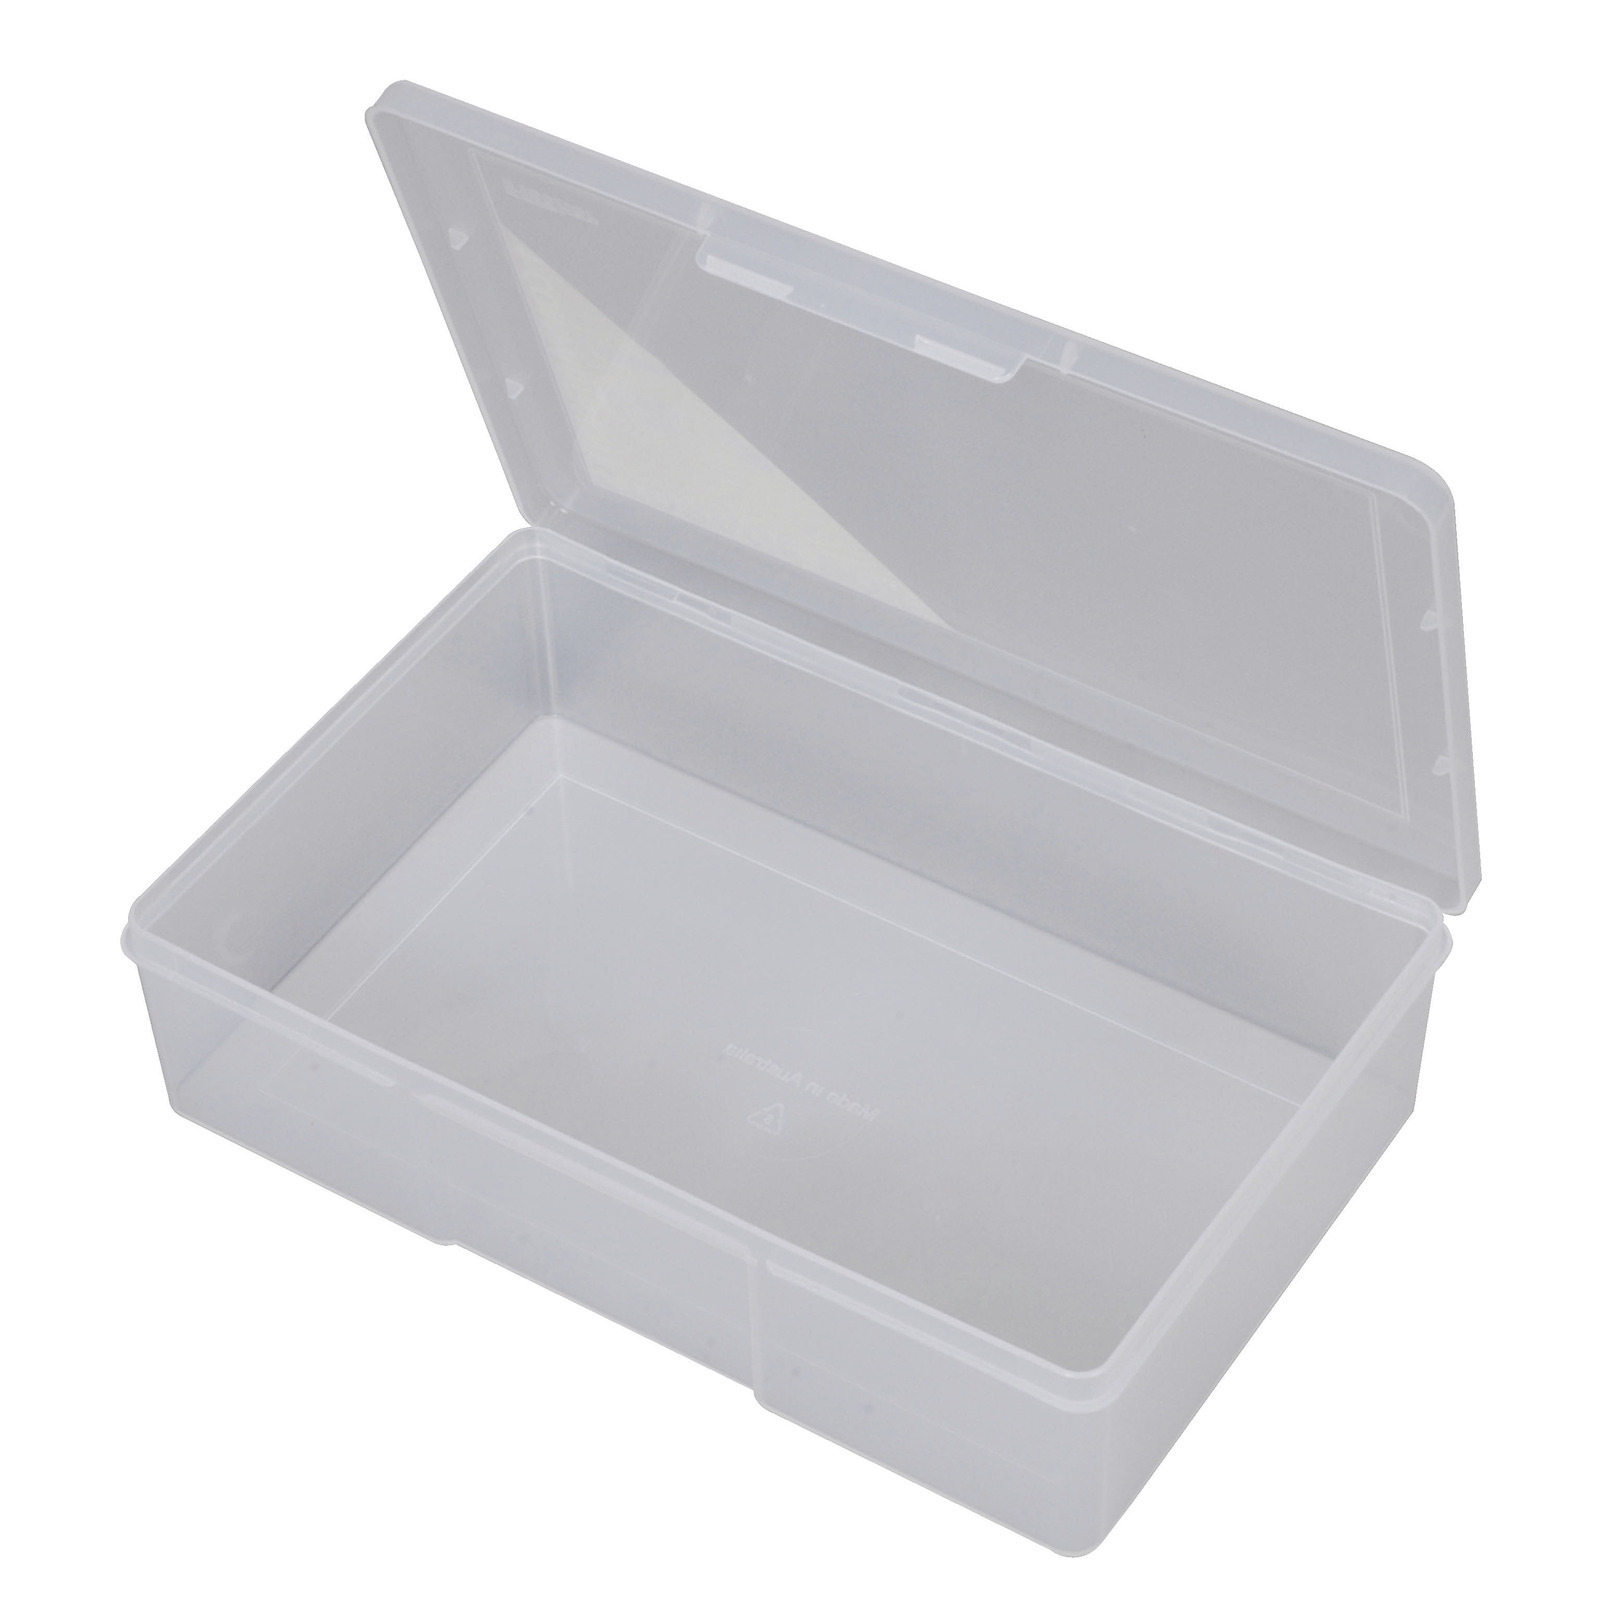 Accessory Boxes Large - Deep (1 compartment)